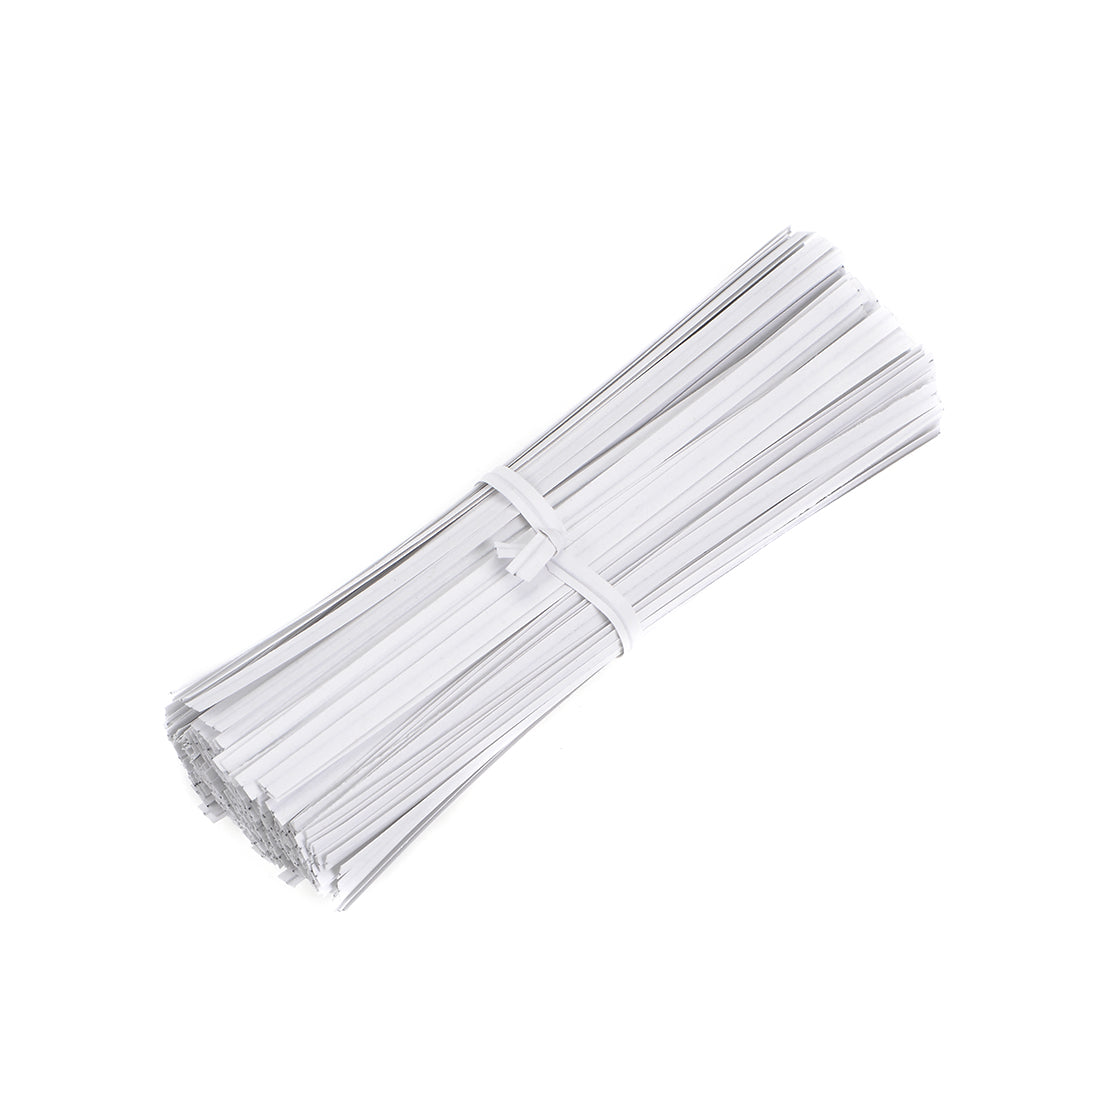 uxcell Uxcell Long Strong Twist Ties 4.7 Inches Quality  Closure Tie for Tying Gift Bags Art Craft Ties Manage Cords White 200pcs